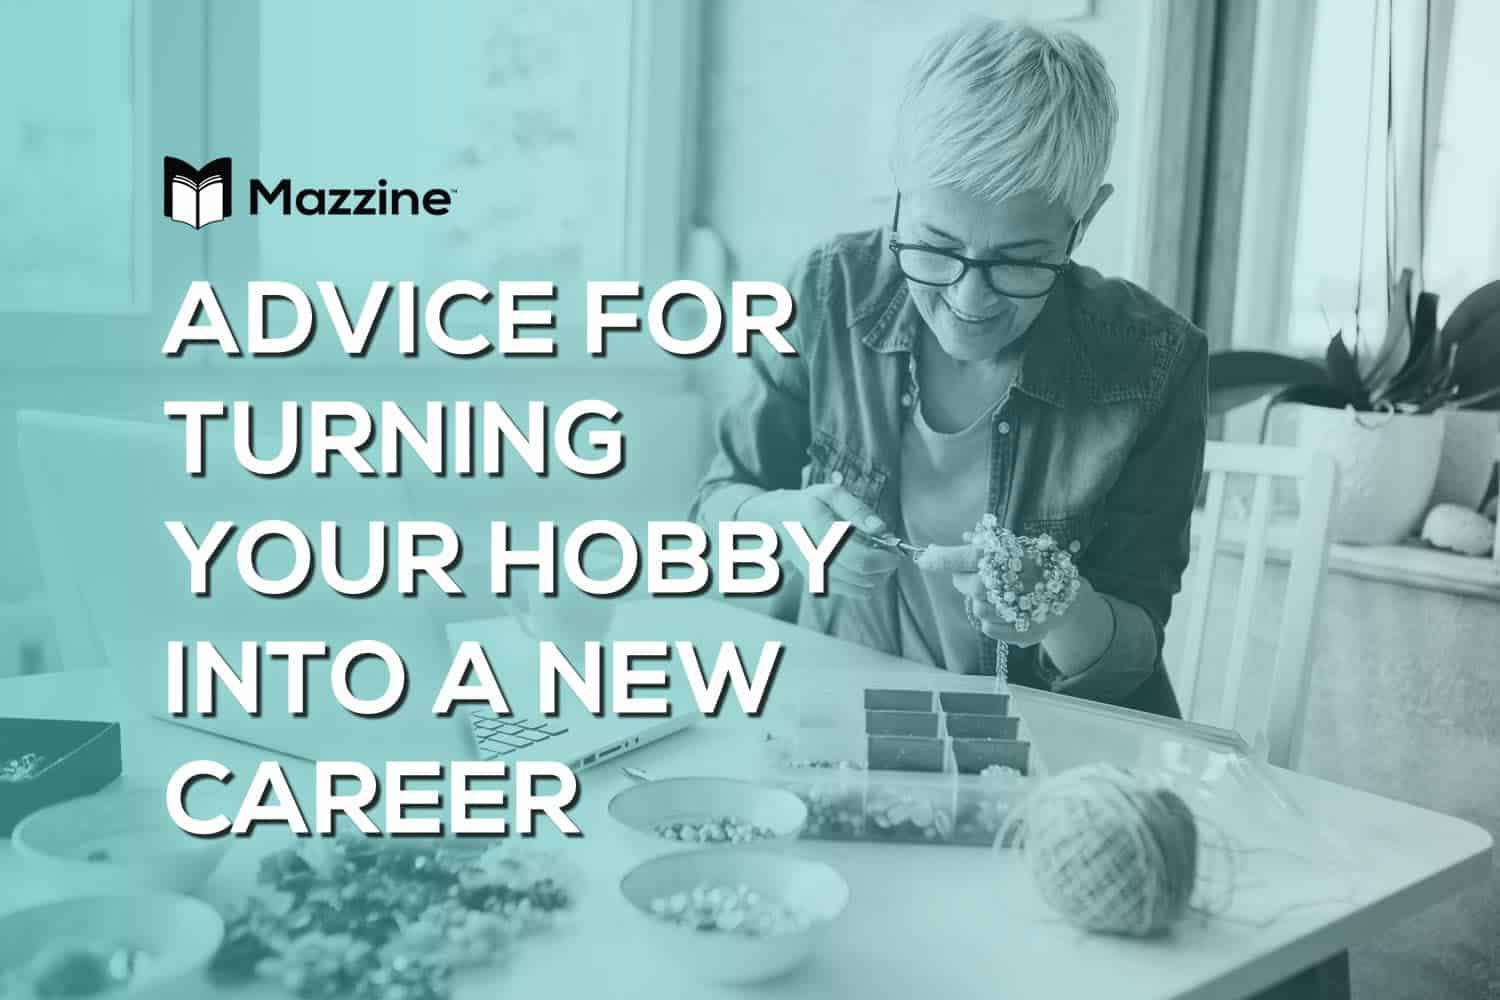 Advice for Turning Your Hobby into a New Career